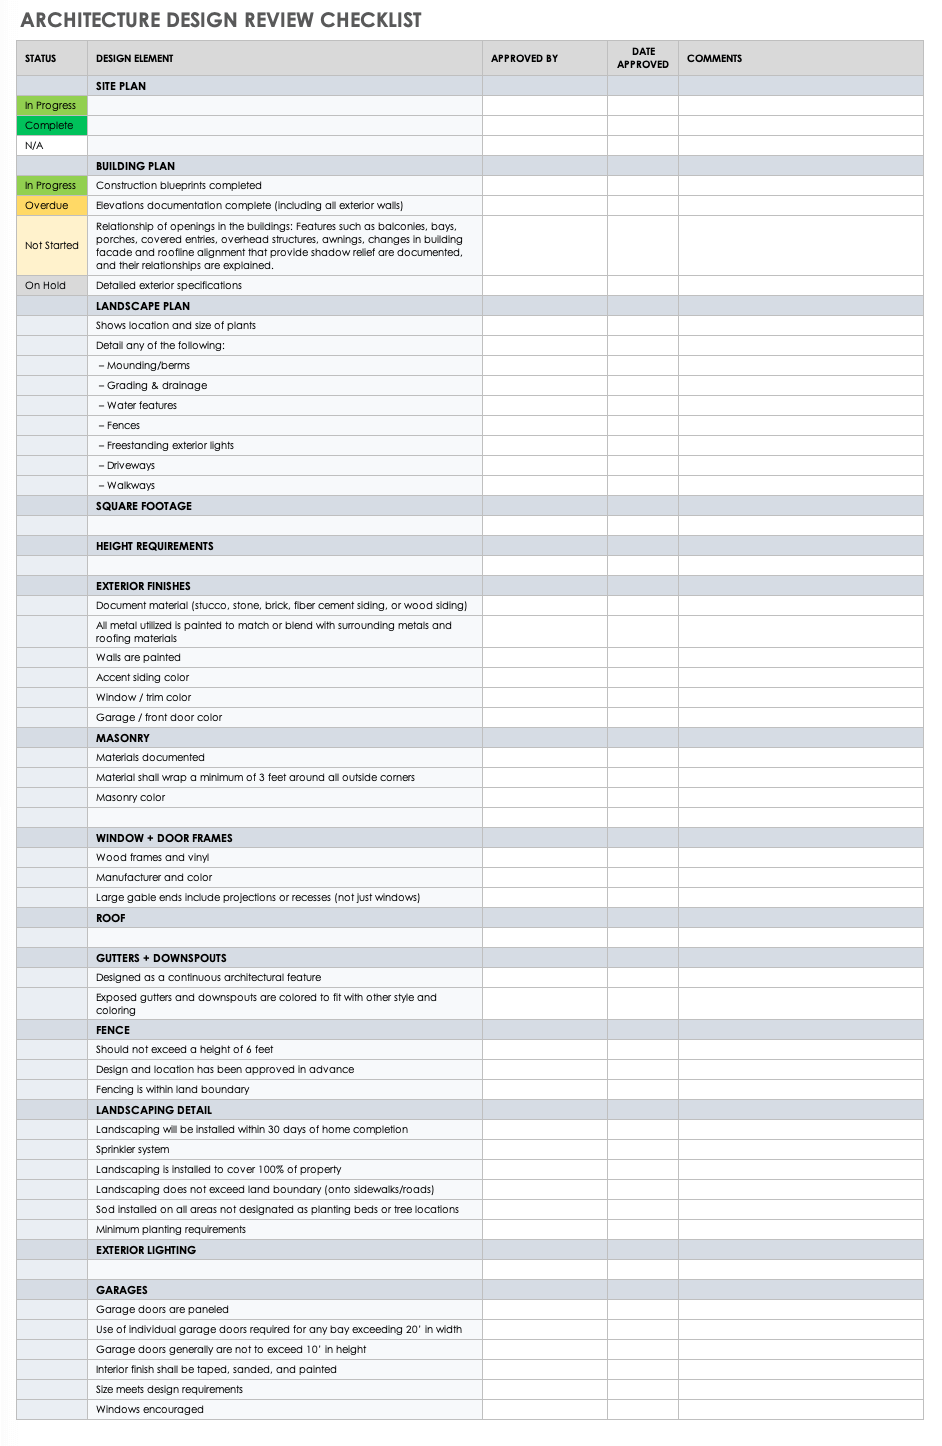 Working Drawings Checklist Pdf Architectural Elements - vrogue.co